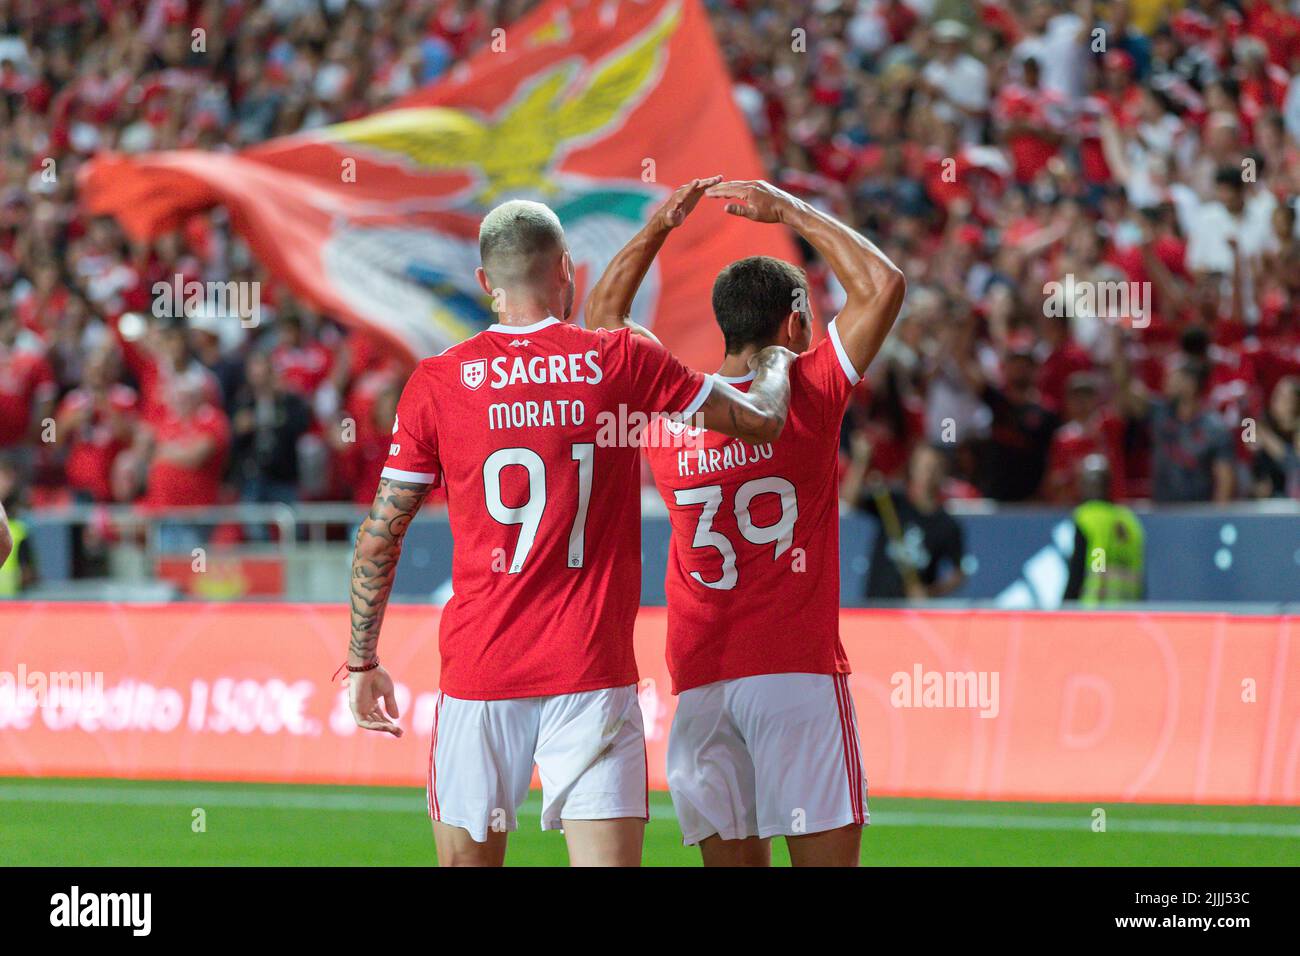 Lisbon, Portugal. July 26, 2022.  Benfica's forward from Portugal Henrique Araujo (39) celebrating with Benfica's defender from Brazil Morato (91) after scoring a goal during the friendly game between SL Benfica vs Newcastle United FC Credit: Alexandre de Sousa/Alamy Live News Stock Photo